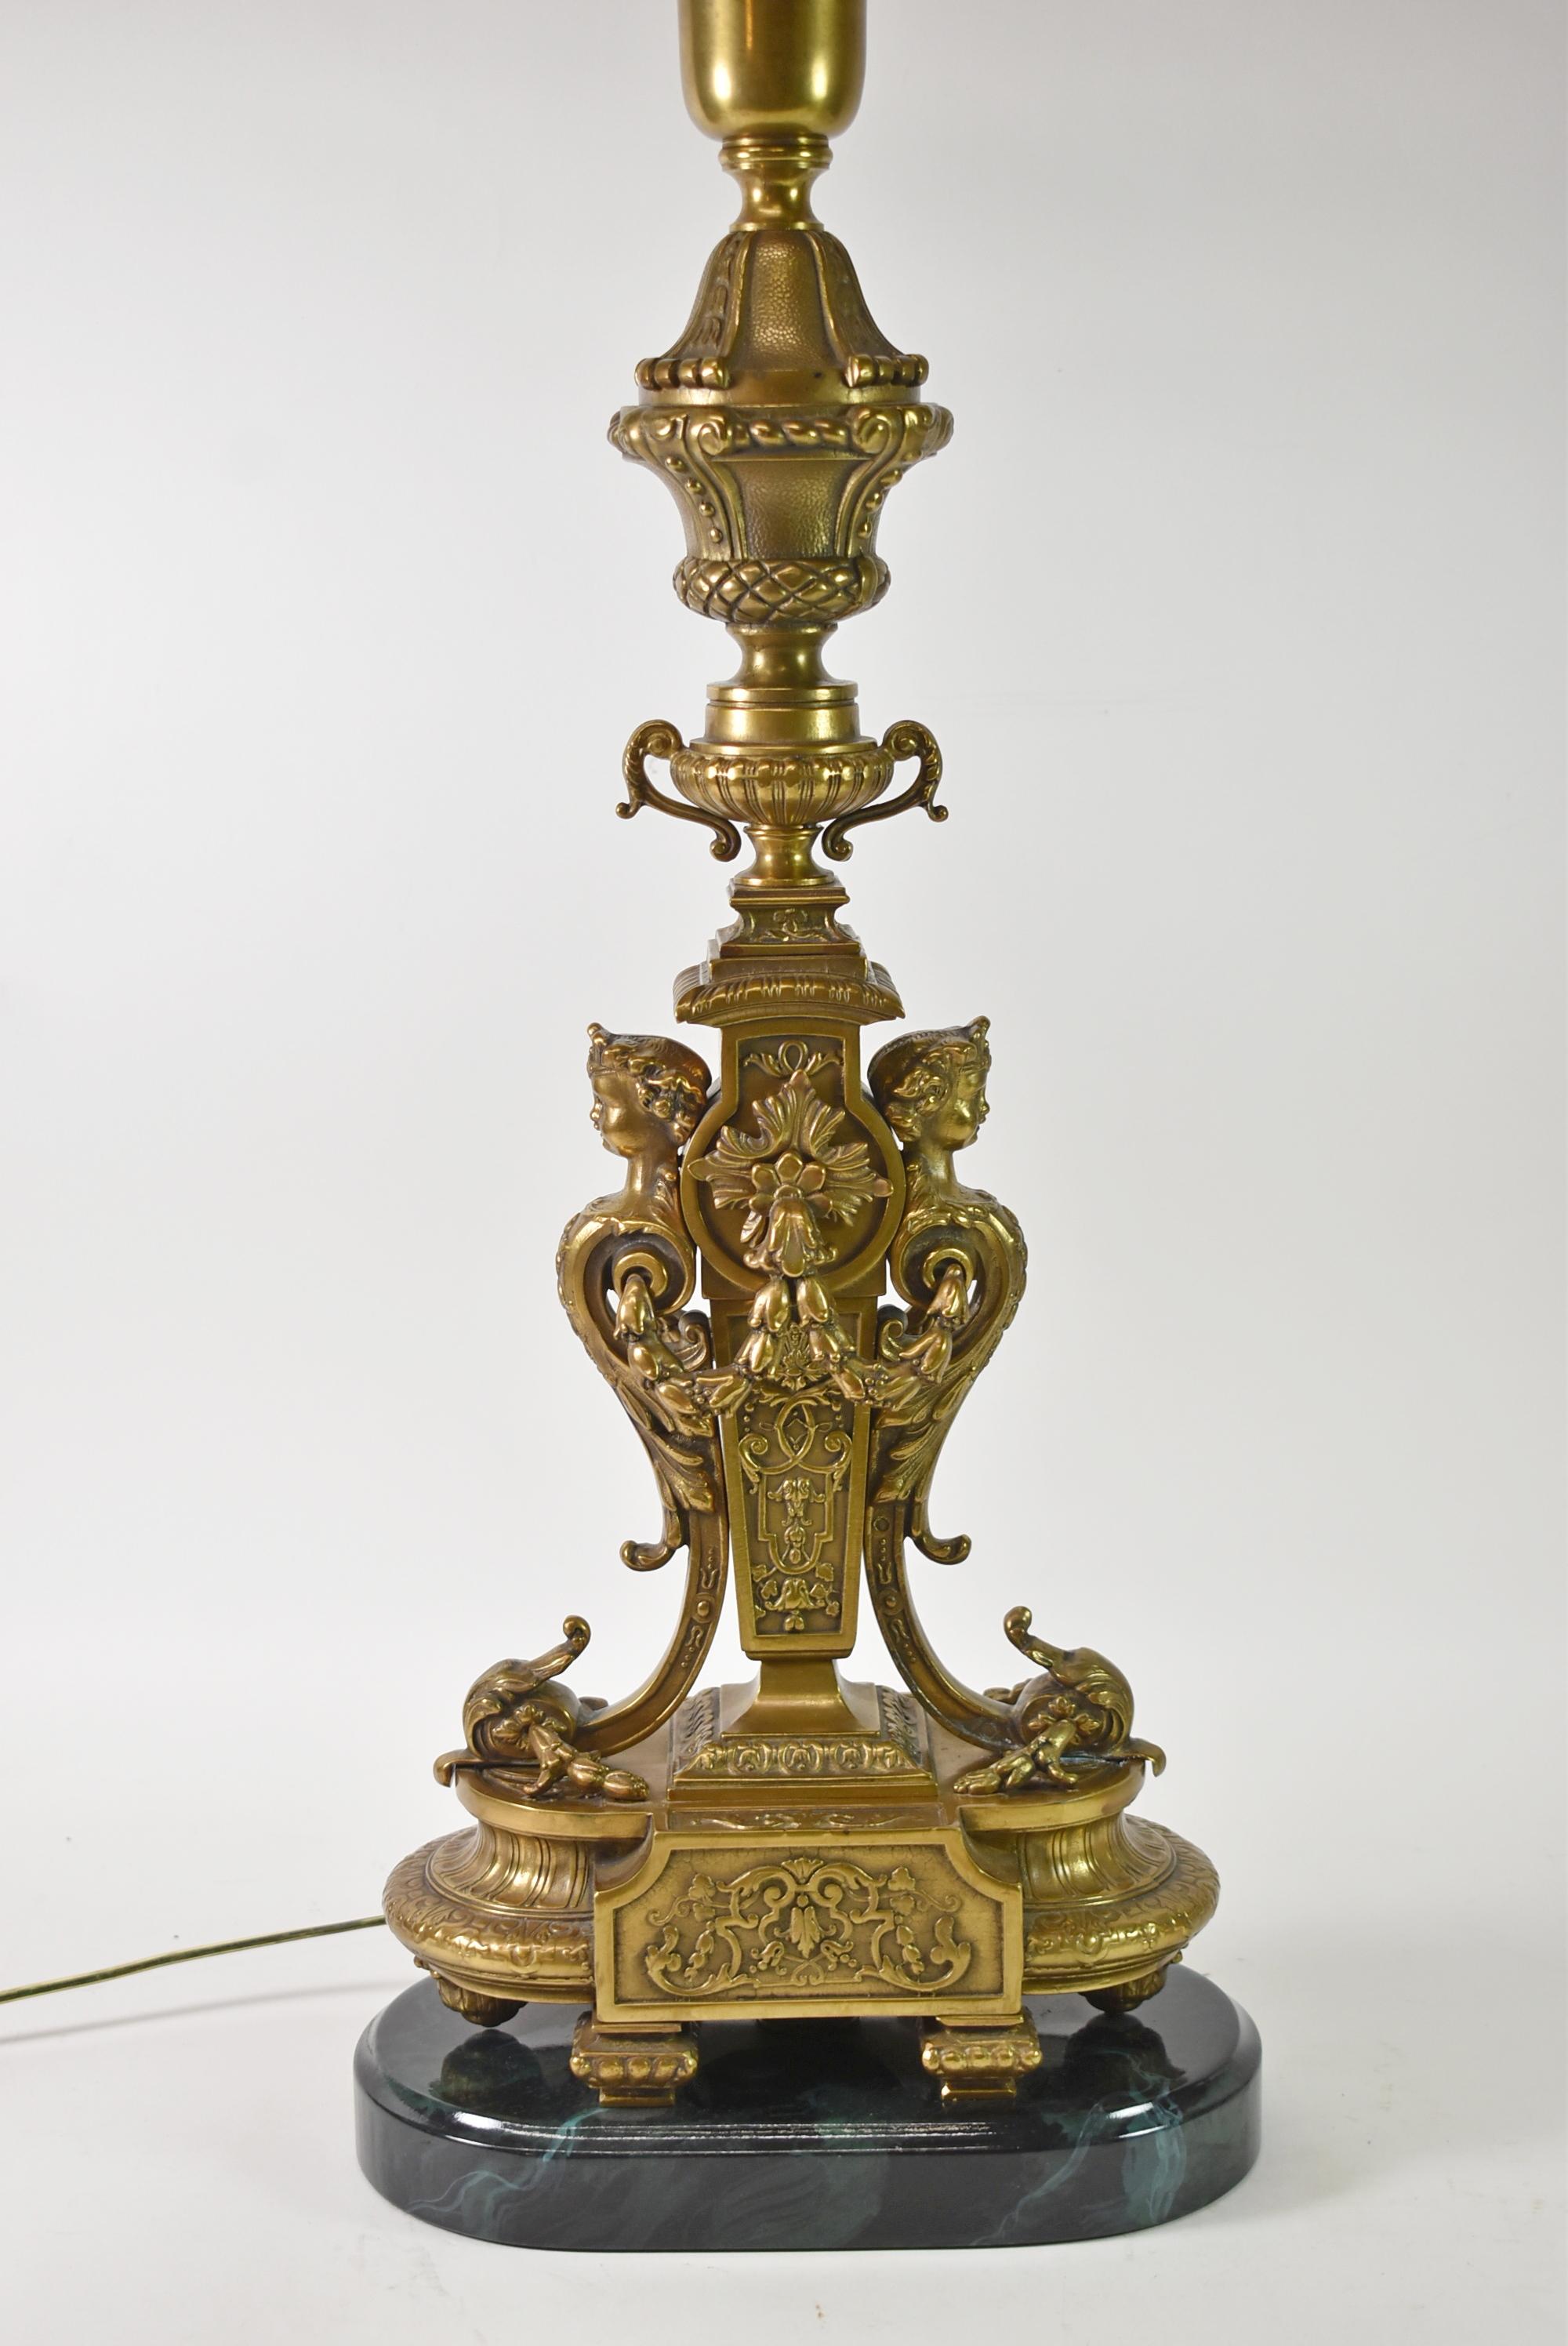 This beautiful Italian Renaissance Table lamp is an urn form with double handles. The body of the lamp is decorated with female figure heads with crowns and leaf form swags. The wiring has been redone with inline switch and socket pulls. The base is